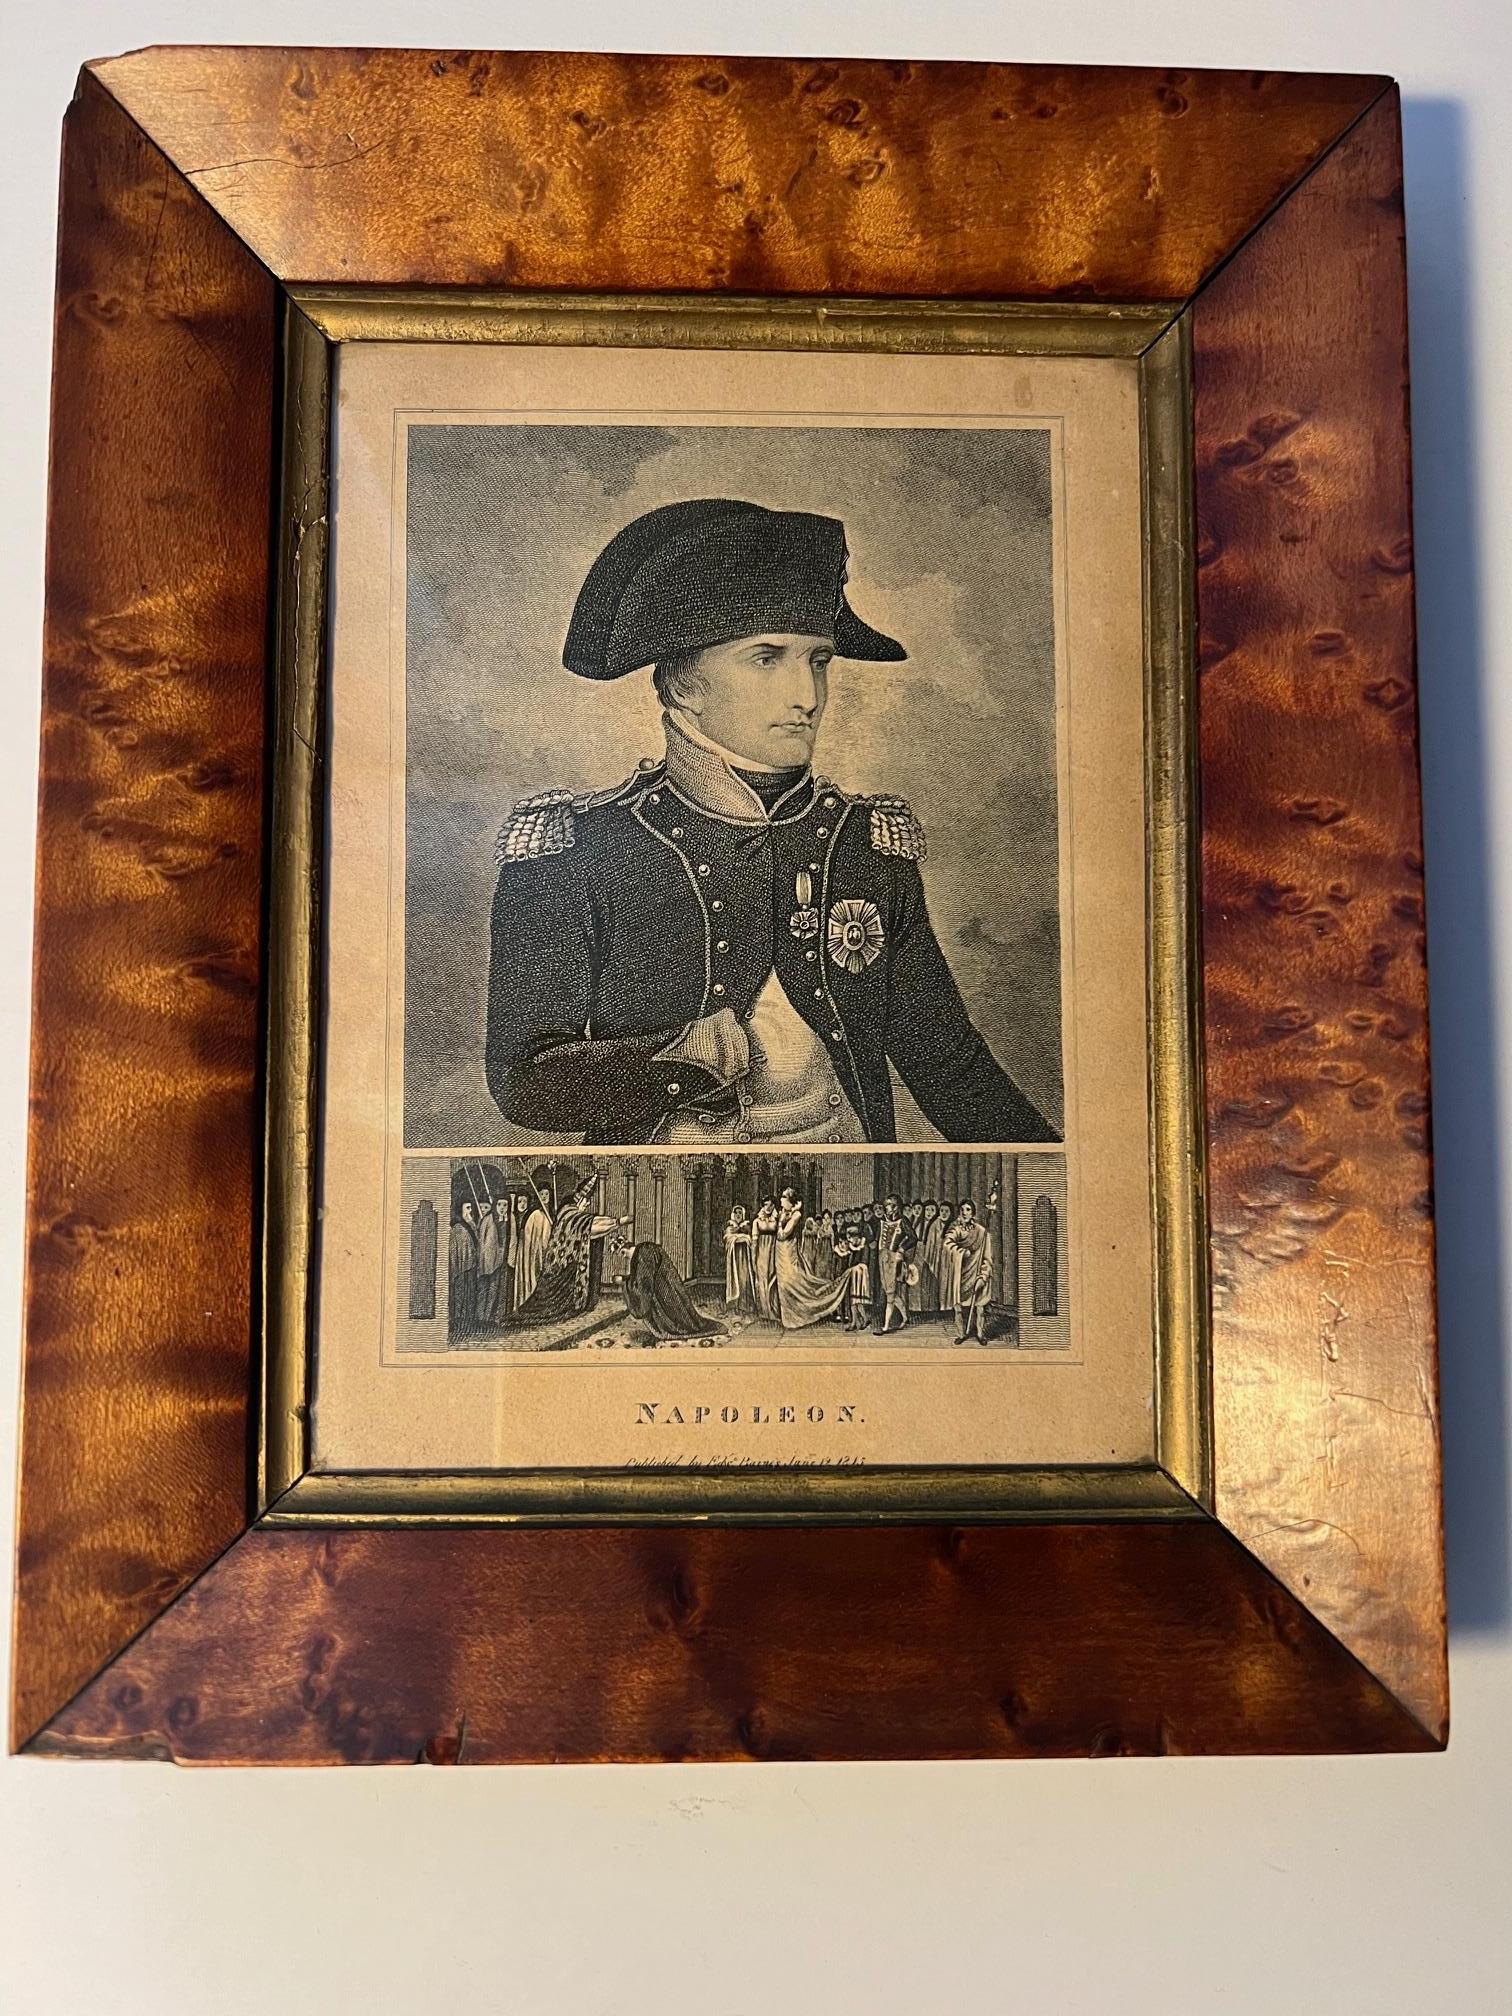 Rather sweet birdseye maple frame & good etching of Napoleon Bonaparte, dated June 12th 1815, published by Edward Baines.

This etching looks to have been in this frame all its life.
The quality of the frame suggests it may have been owned by an